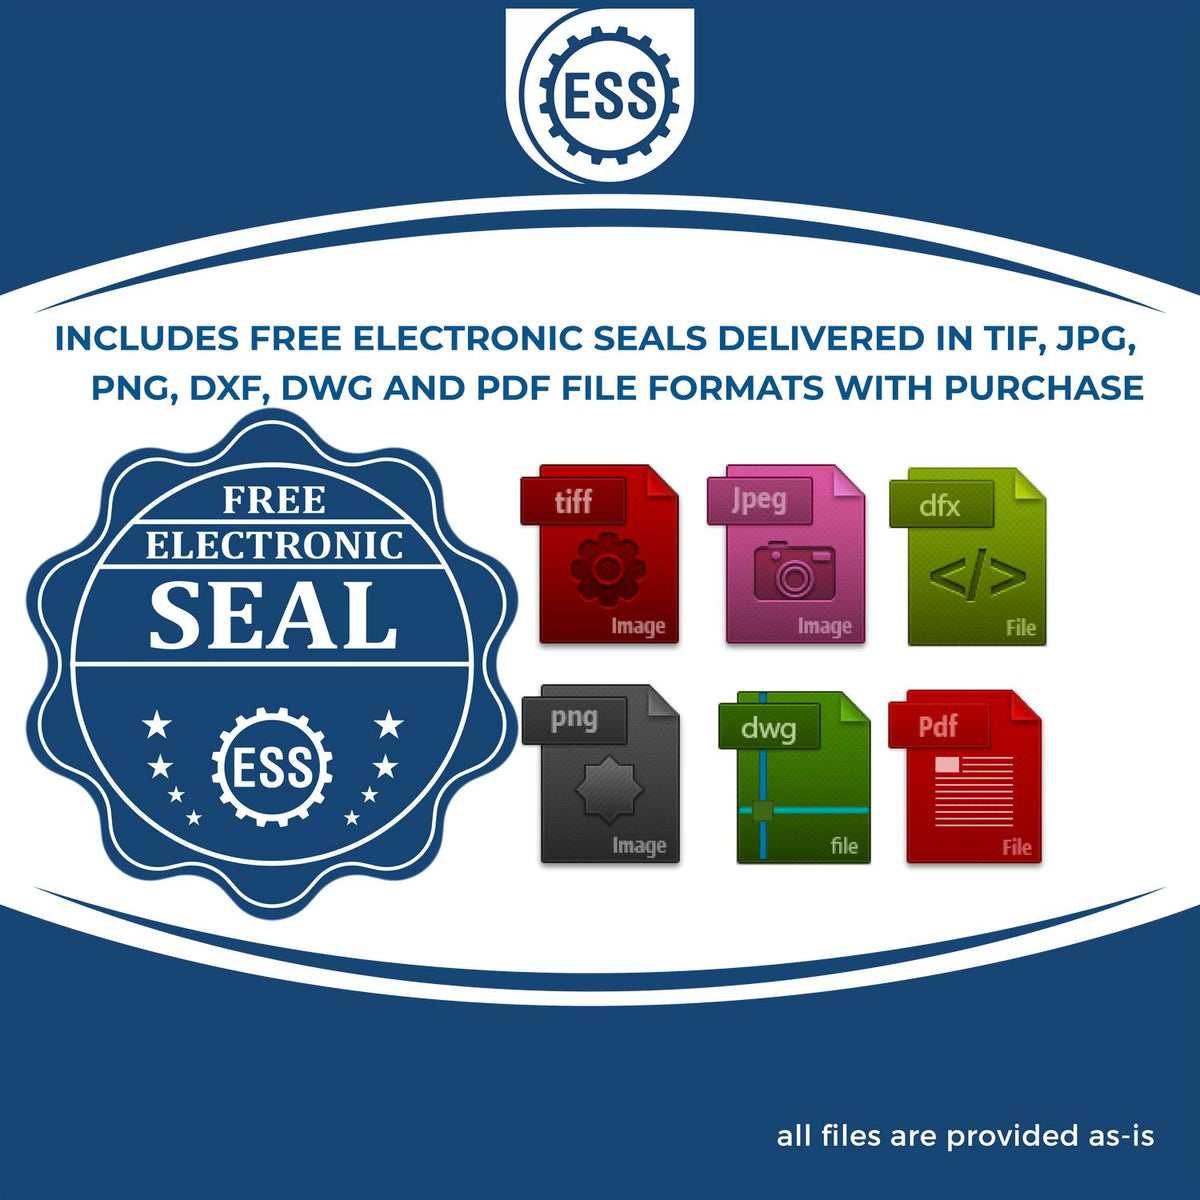 An infographic for the free electronic seal for the Gift West Virginia Land Surveyor Seal illustrating the different file type icons such as DXF, DWG, TIF, JPG and PNG.